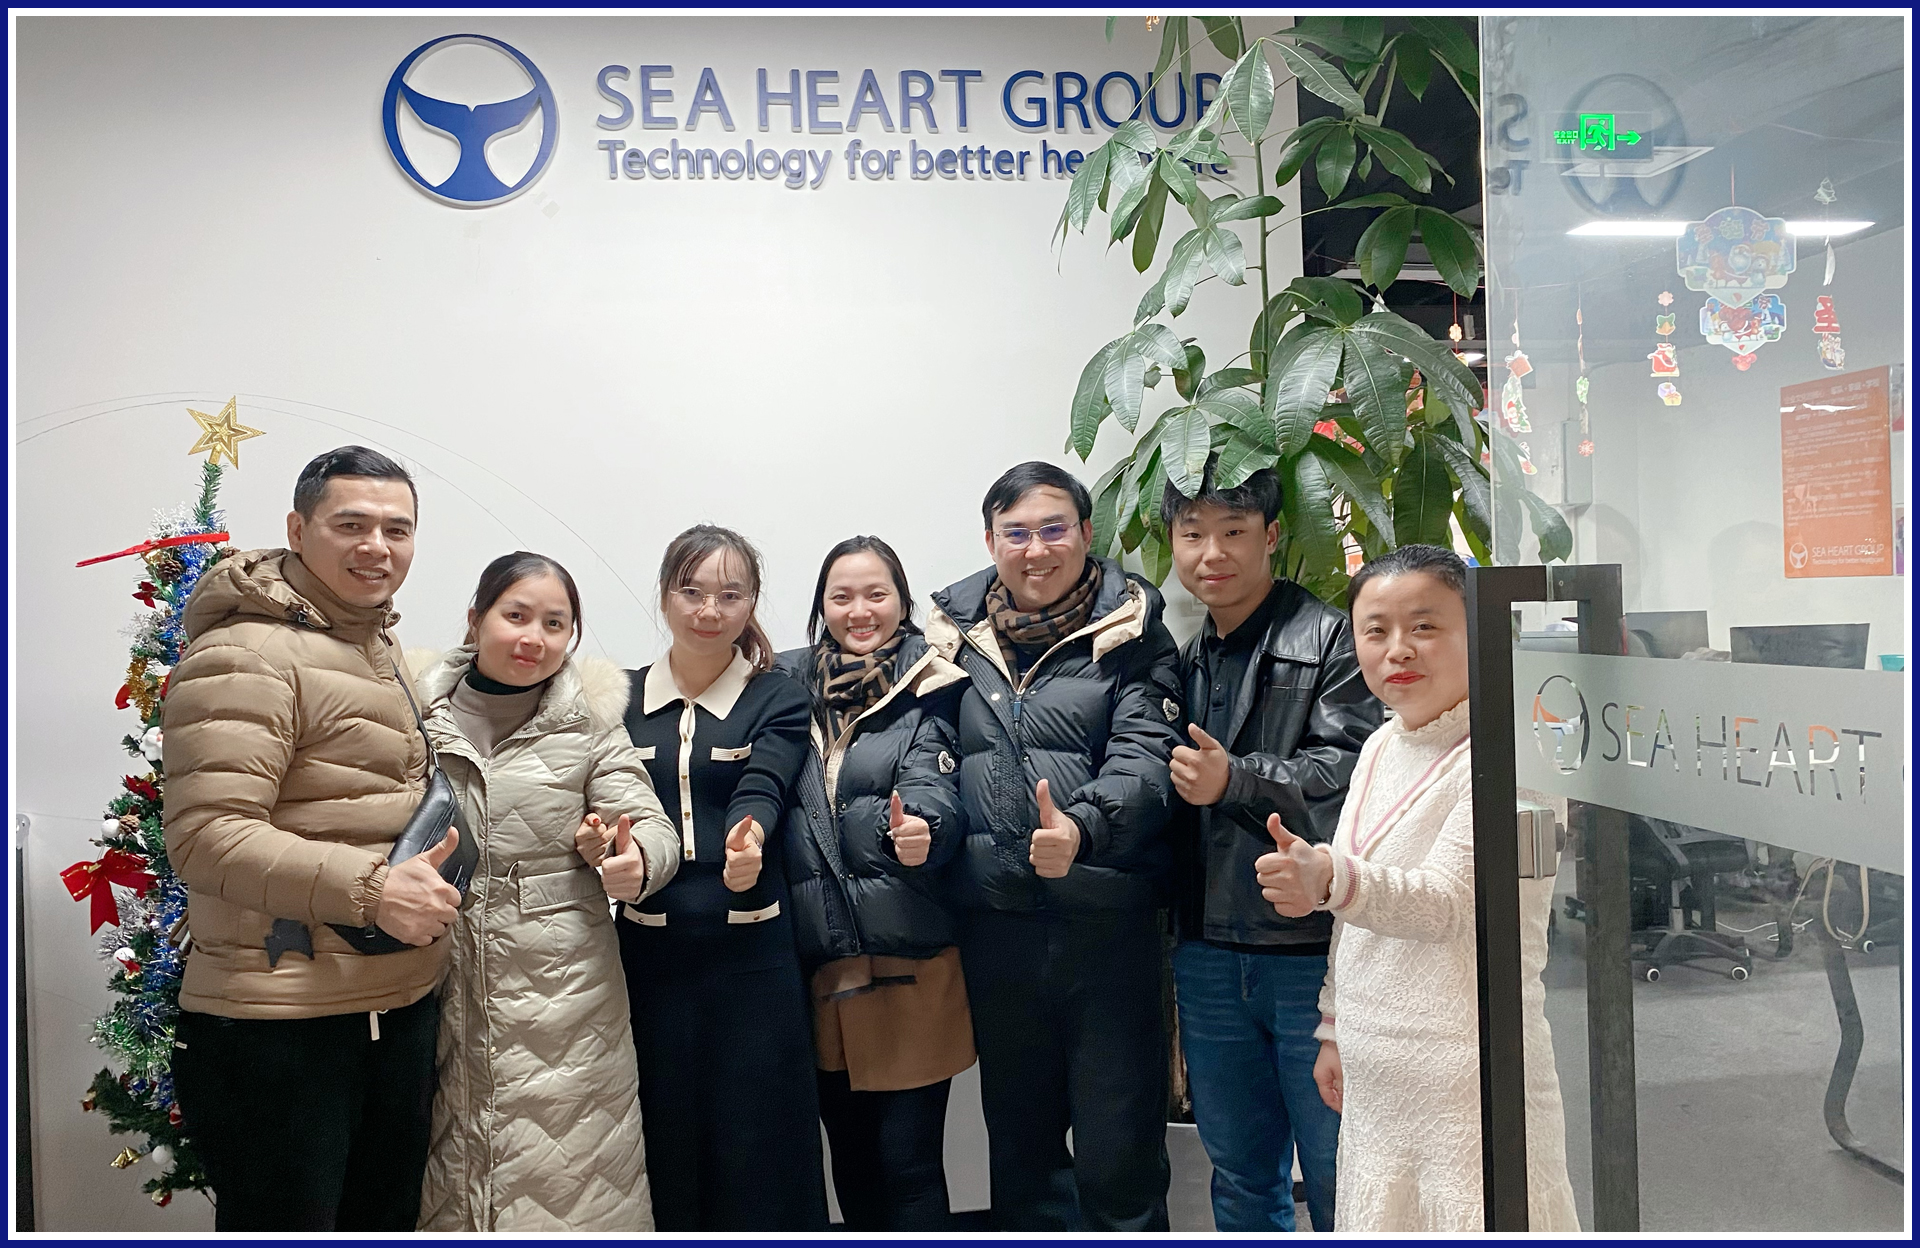 SEA HEART GROUP Announces Successful Collaboration with Vietnamese Client